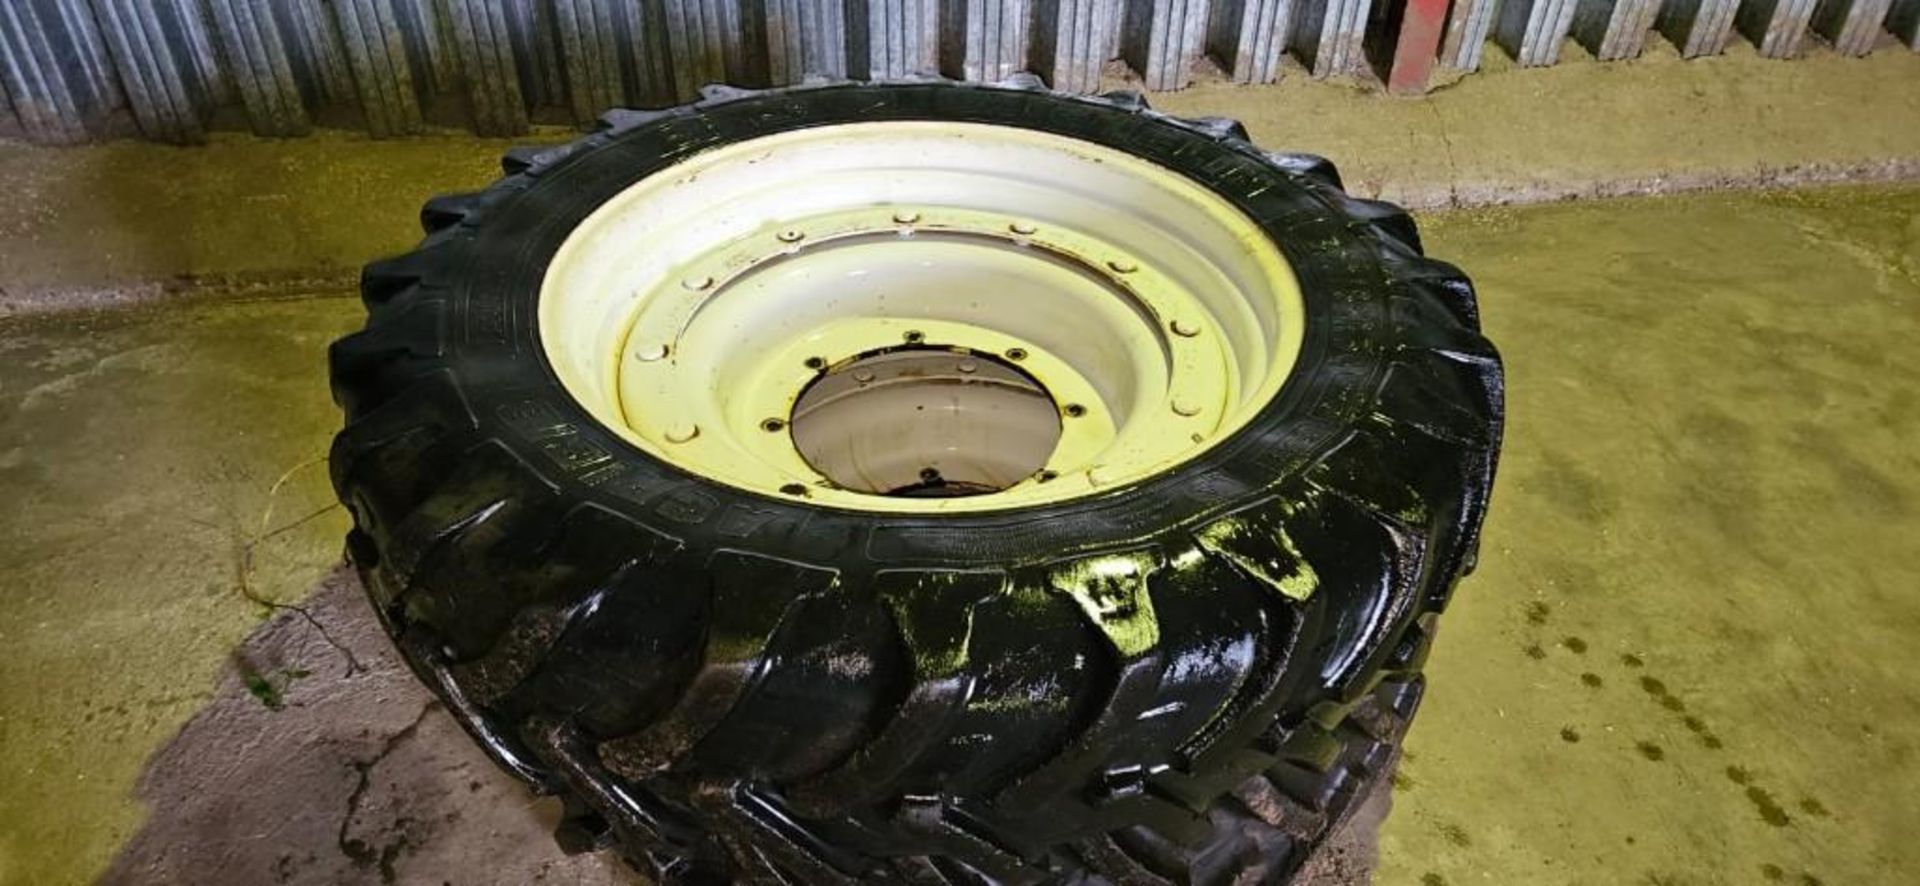 New Holland Row Crop Wheels and Tyres 320/85R34 and 420/80R46 - (Norfolk)